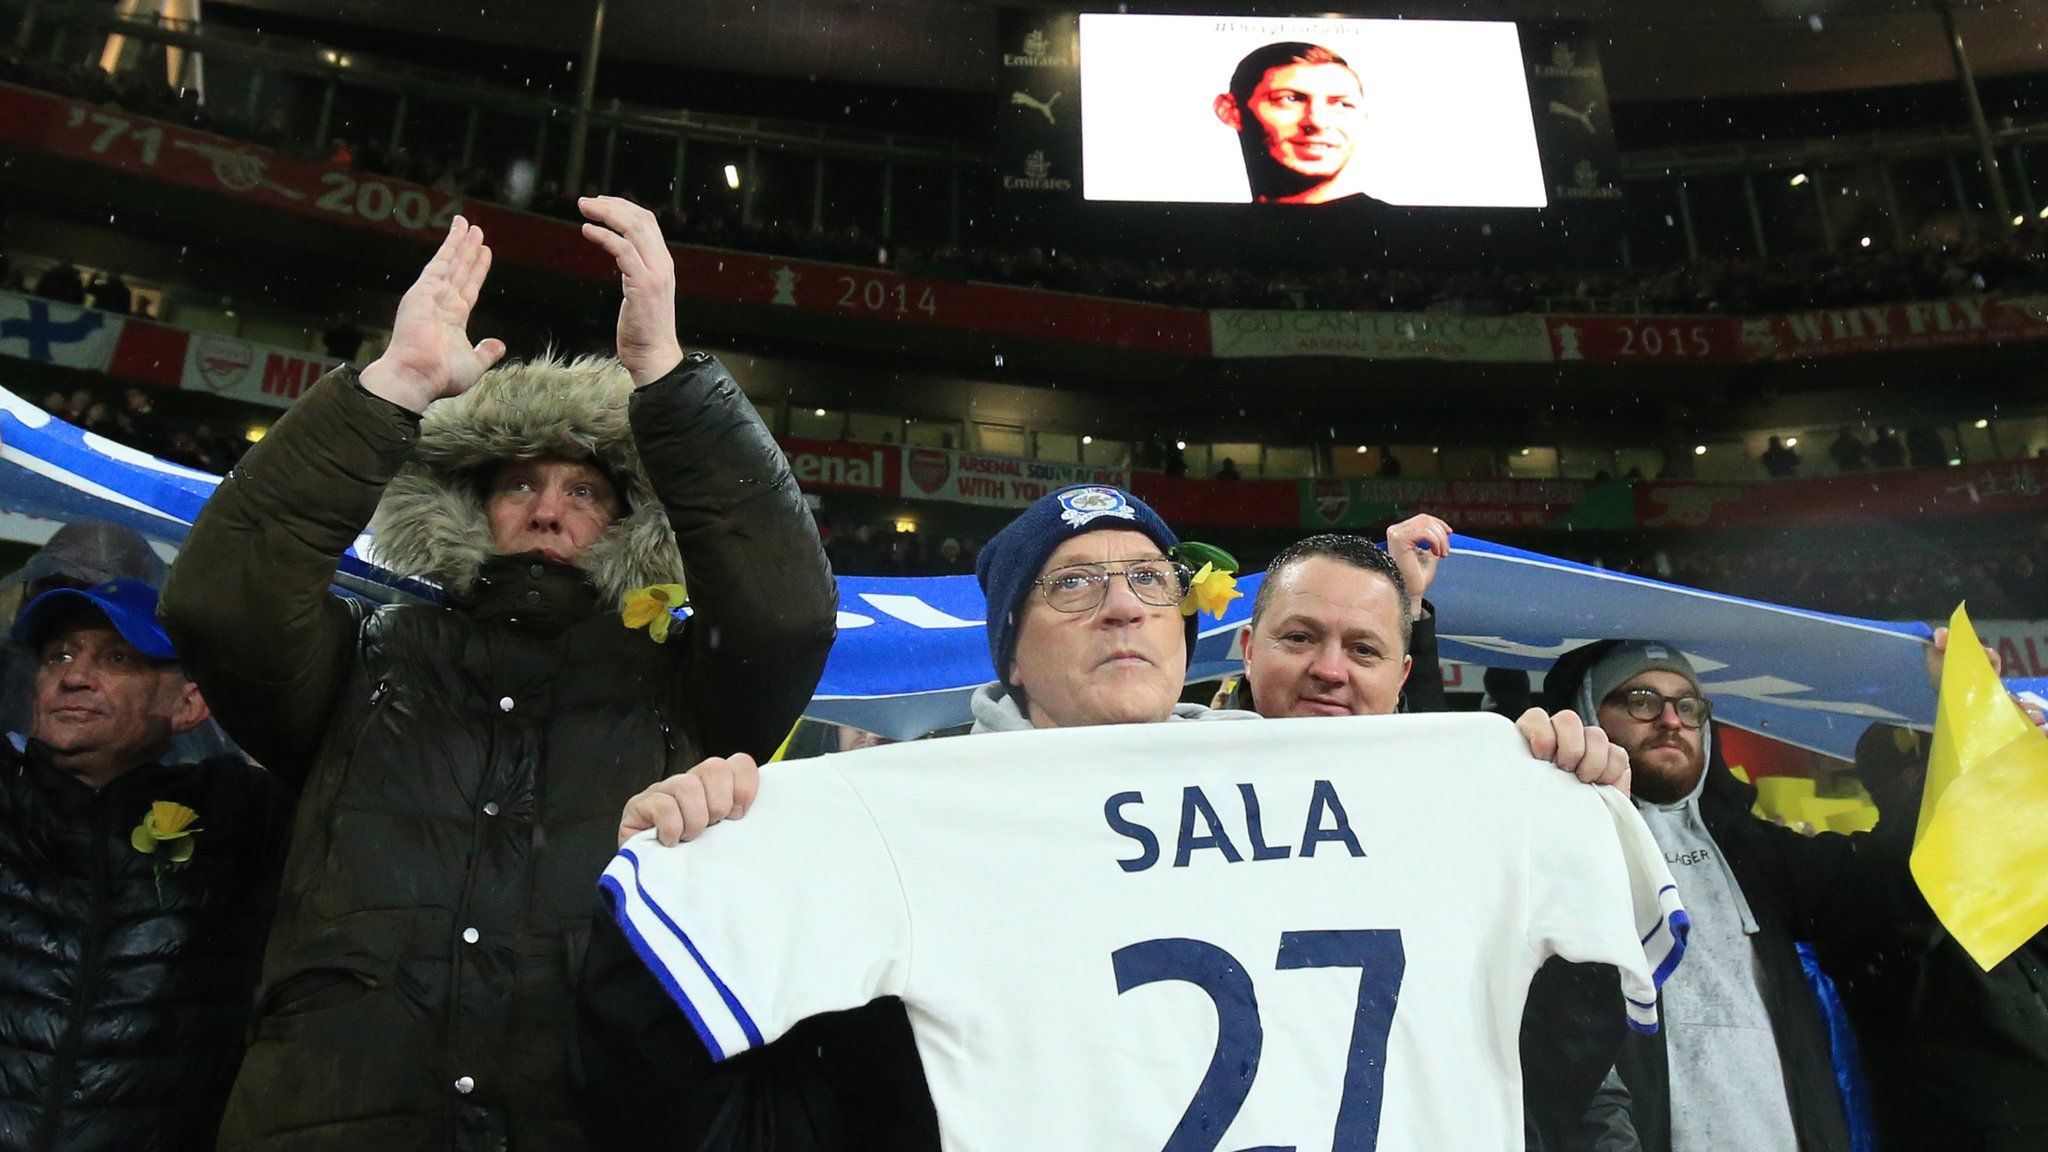 Tributes to Emiliano Sala during Arsenal's match with Cardiff